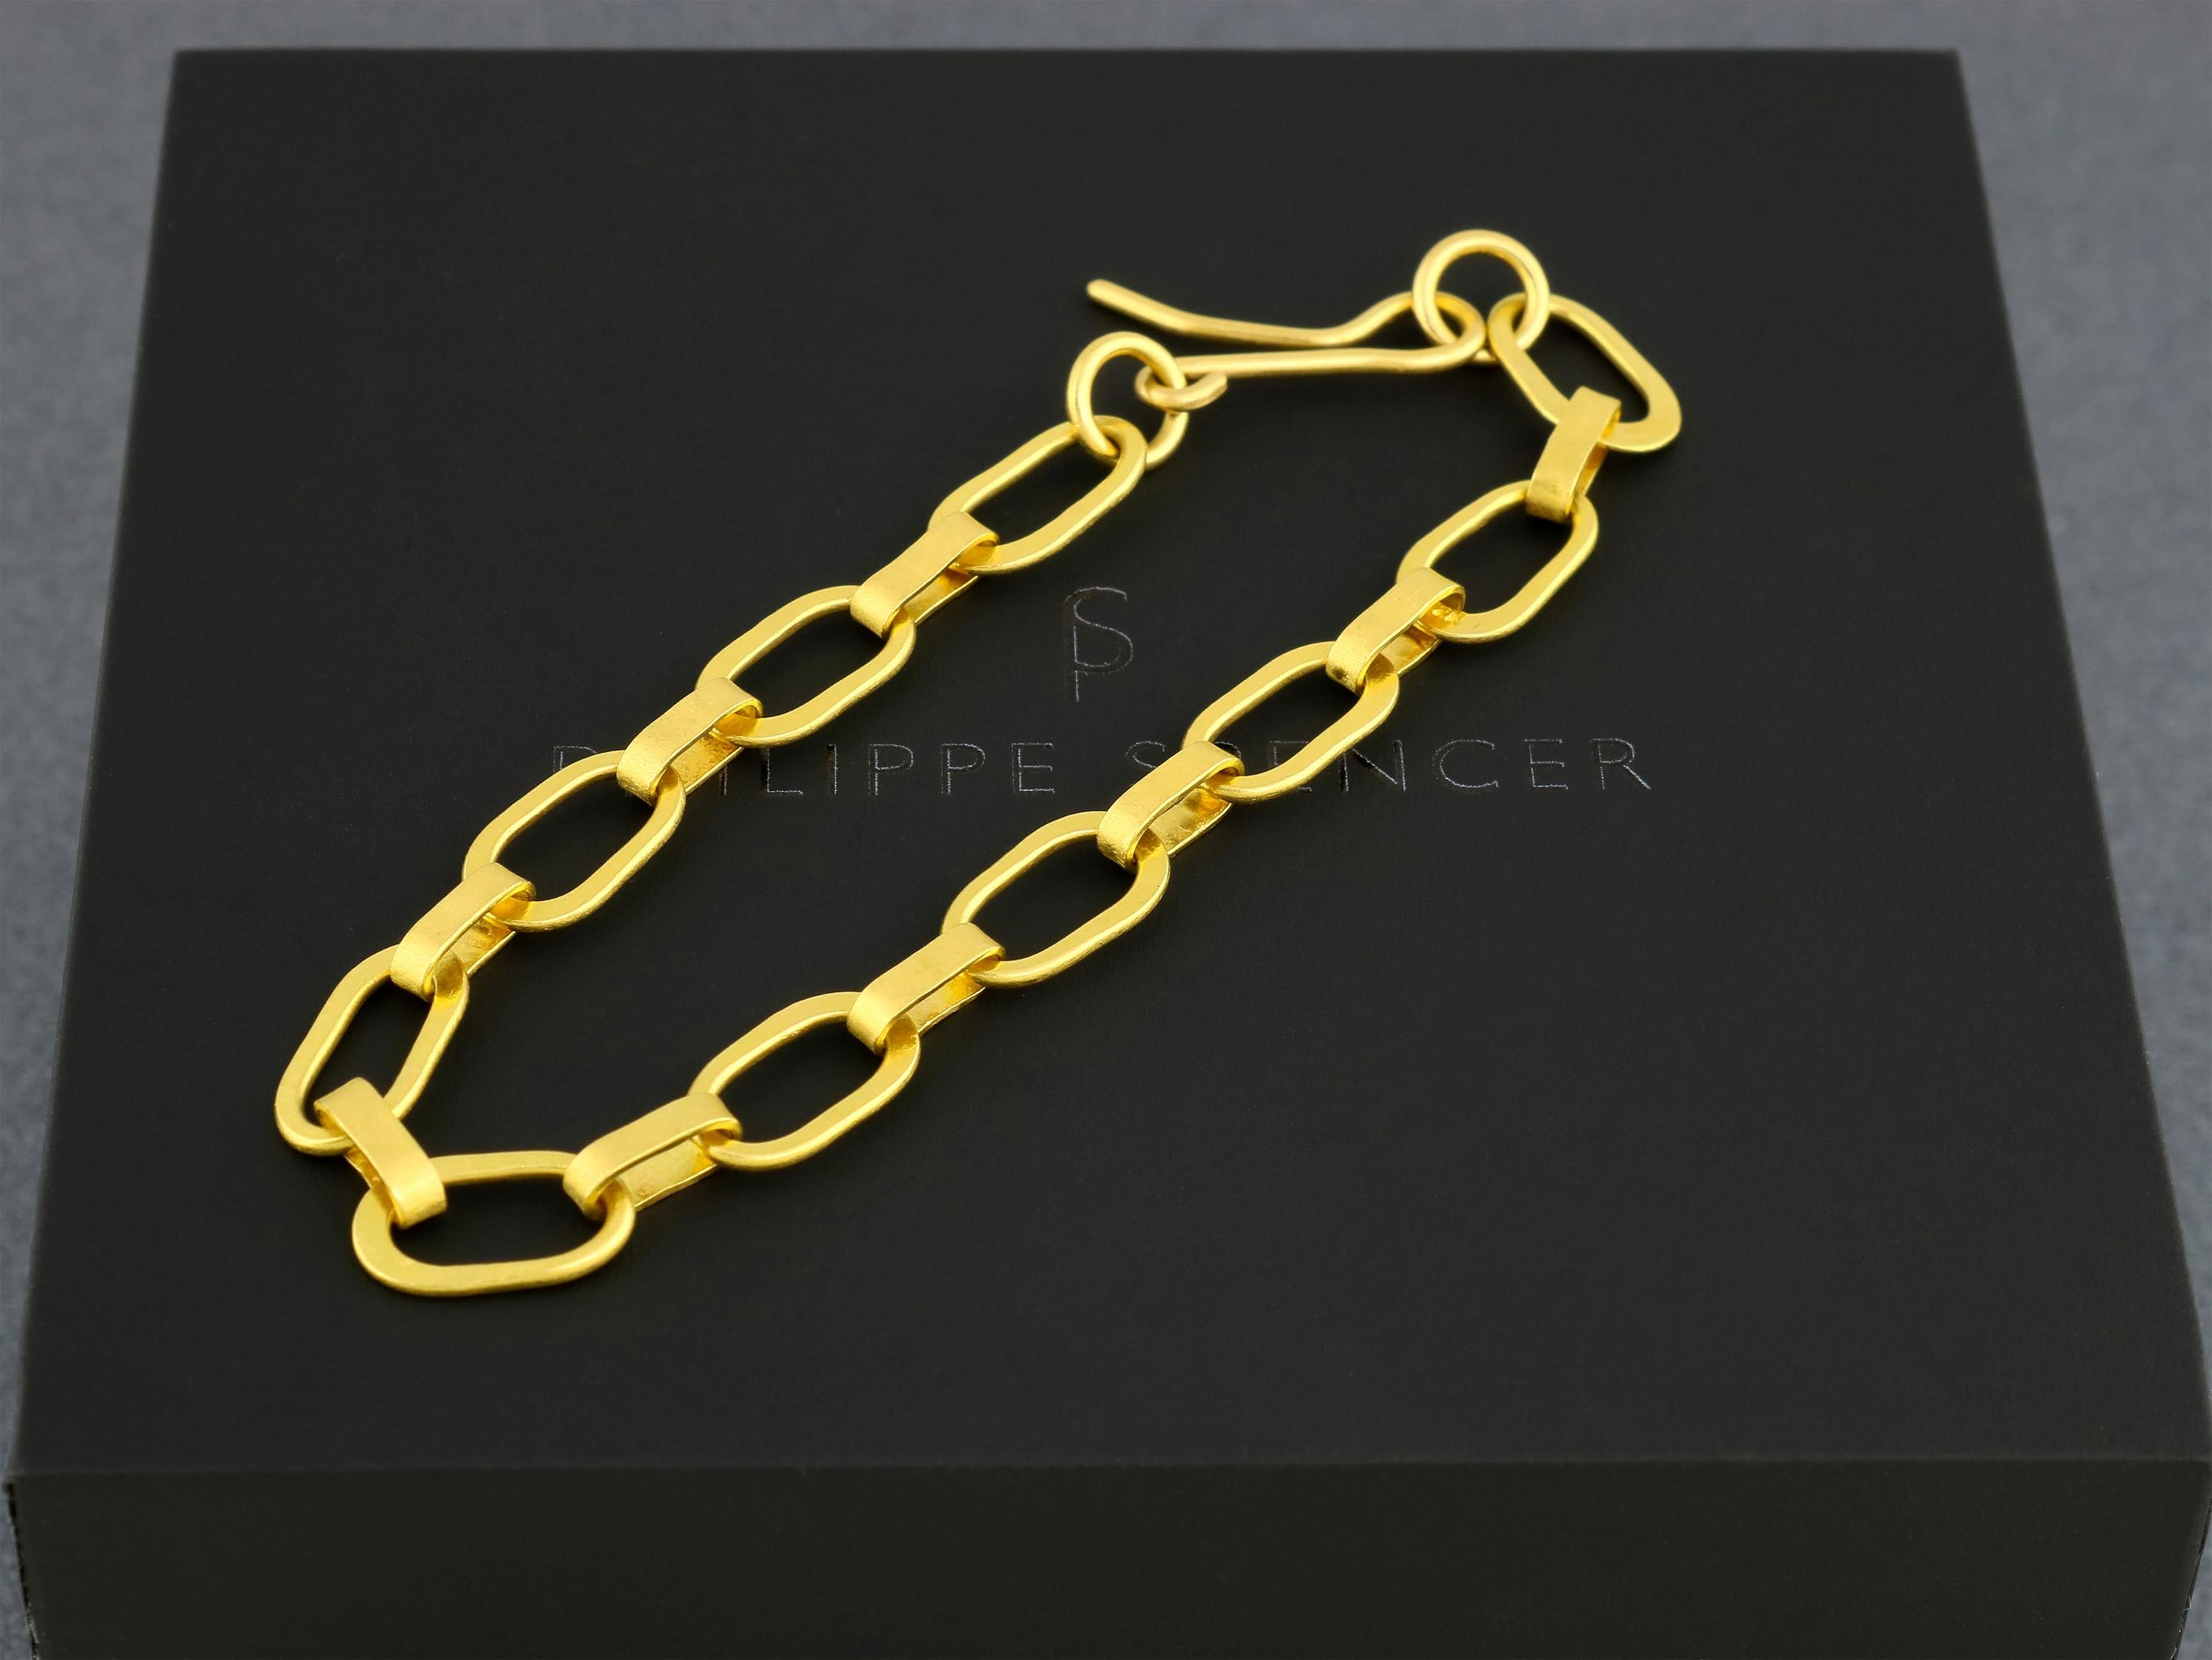 PHILIPPE SPENCER - Solid 22K Gold Oval Link Bracelet. Each link & component unique and authentically smithed on a vintage anvil. Era concealing heavy matte finish.

This in-stock item is size 7.25